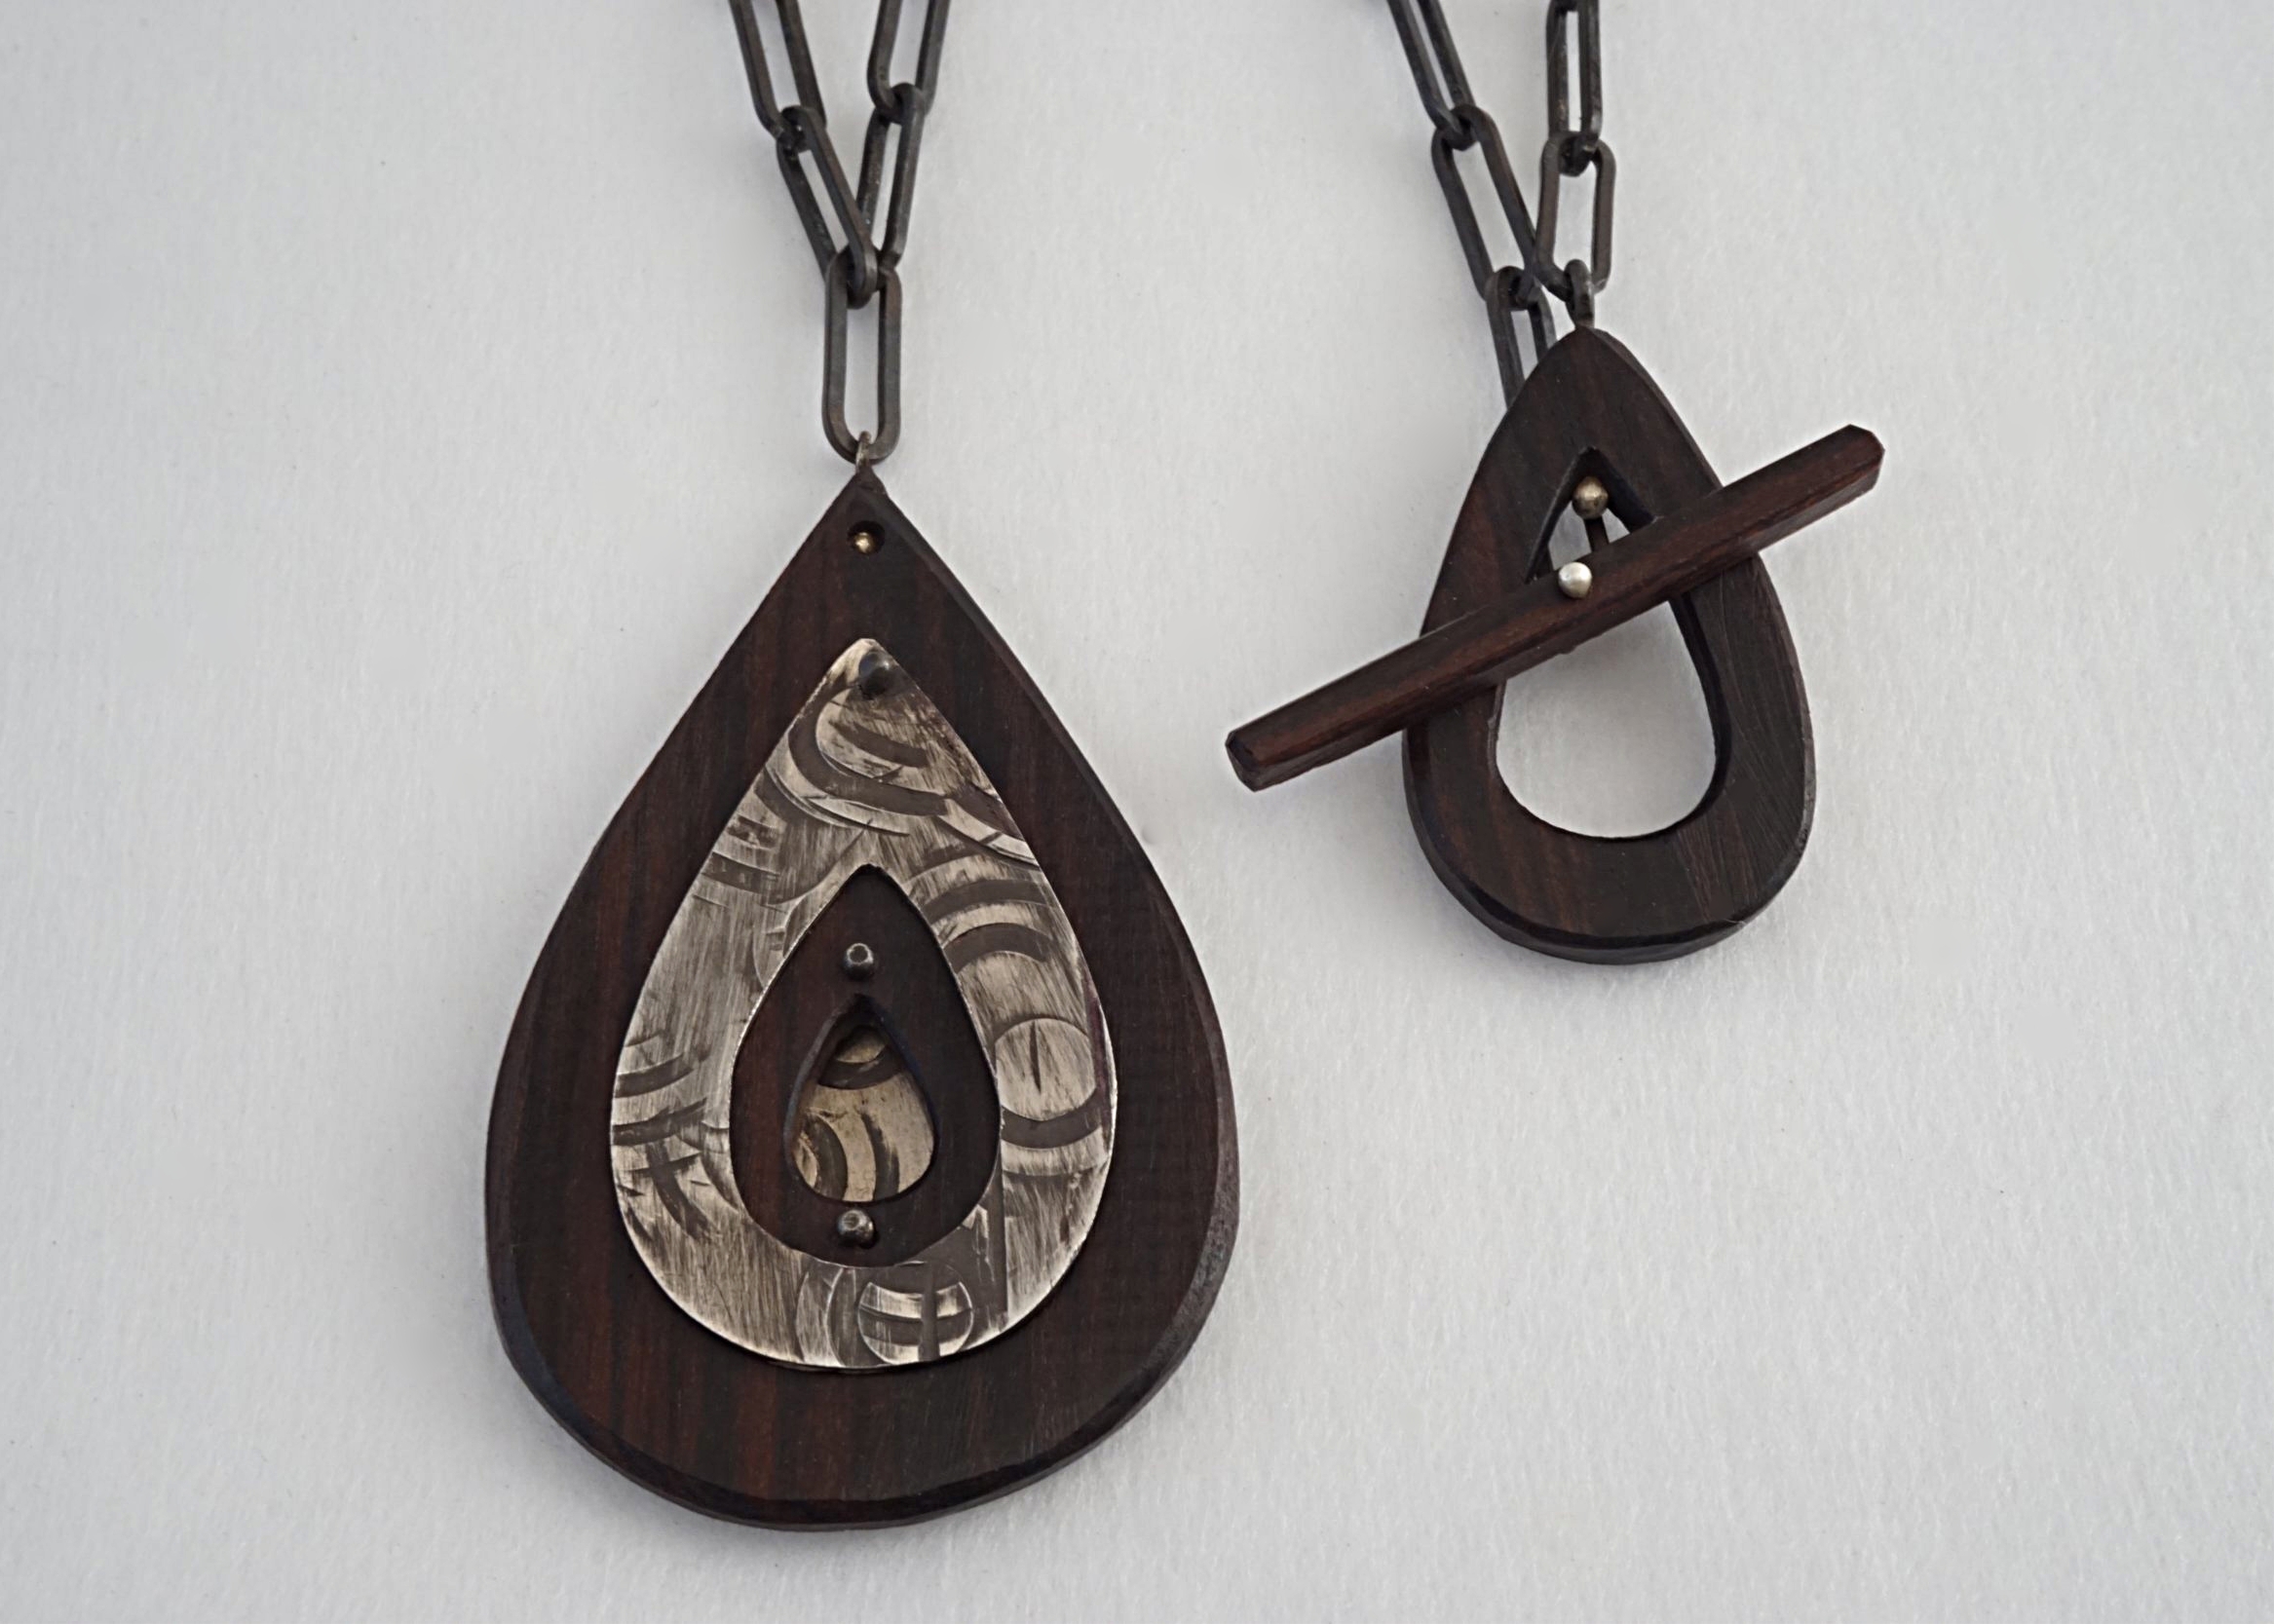 Bolivian rosewood pendant with hand stamped sterling silver